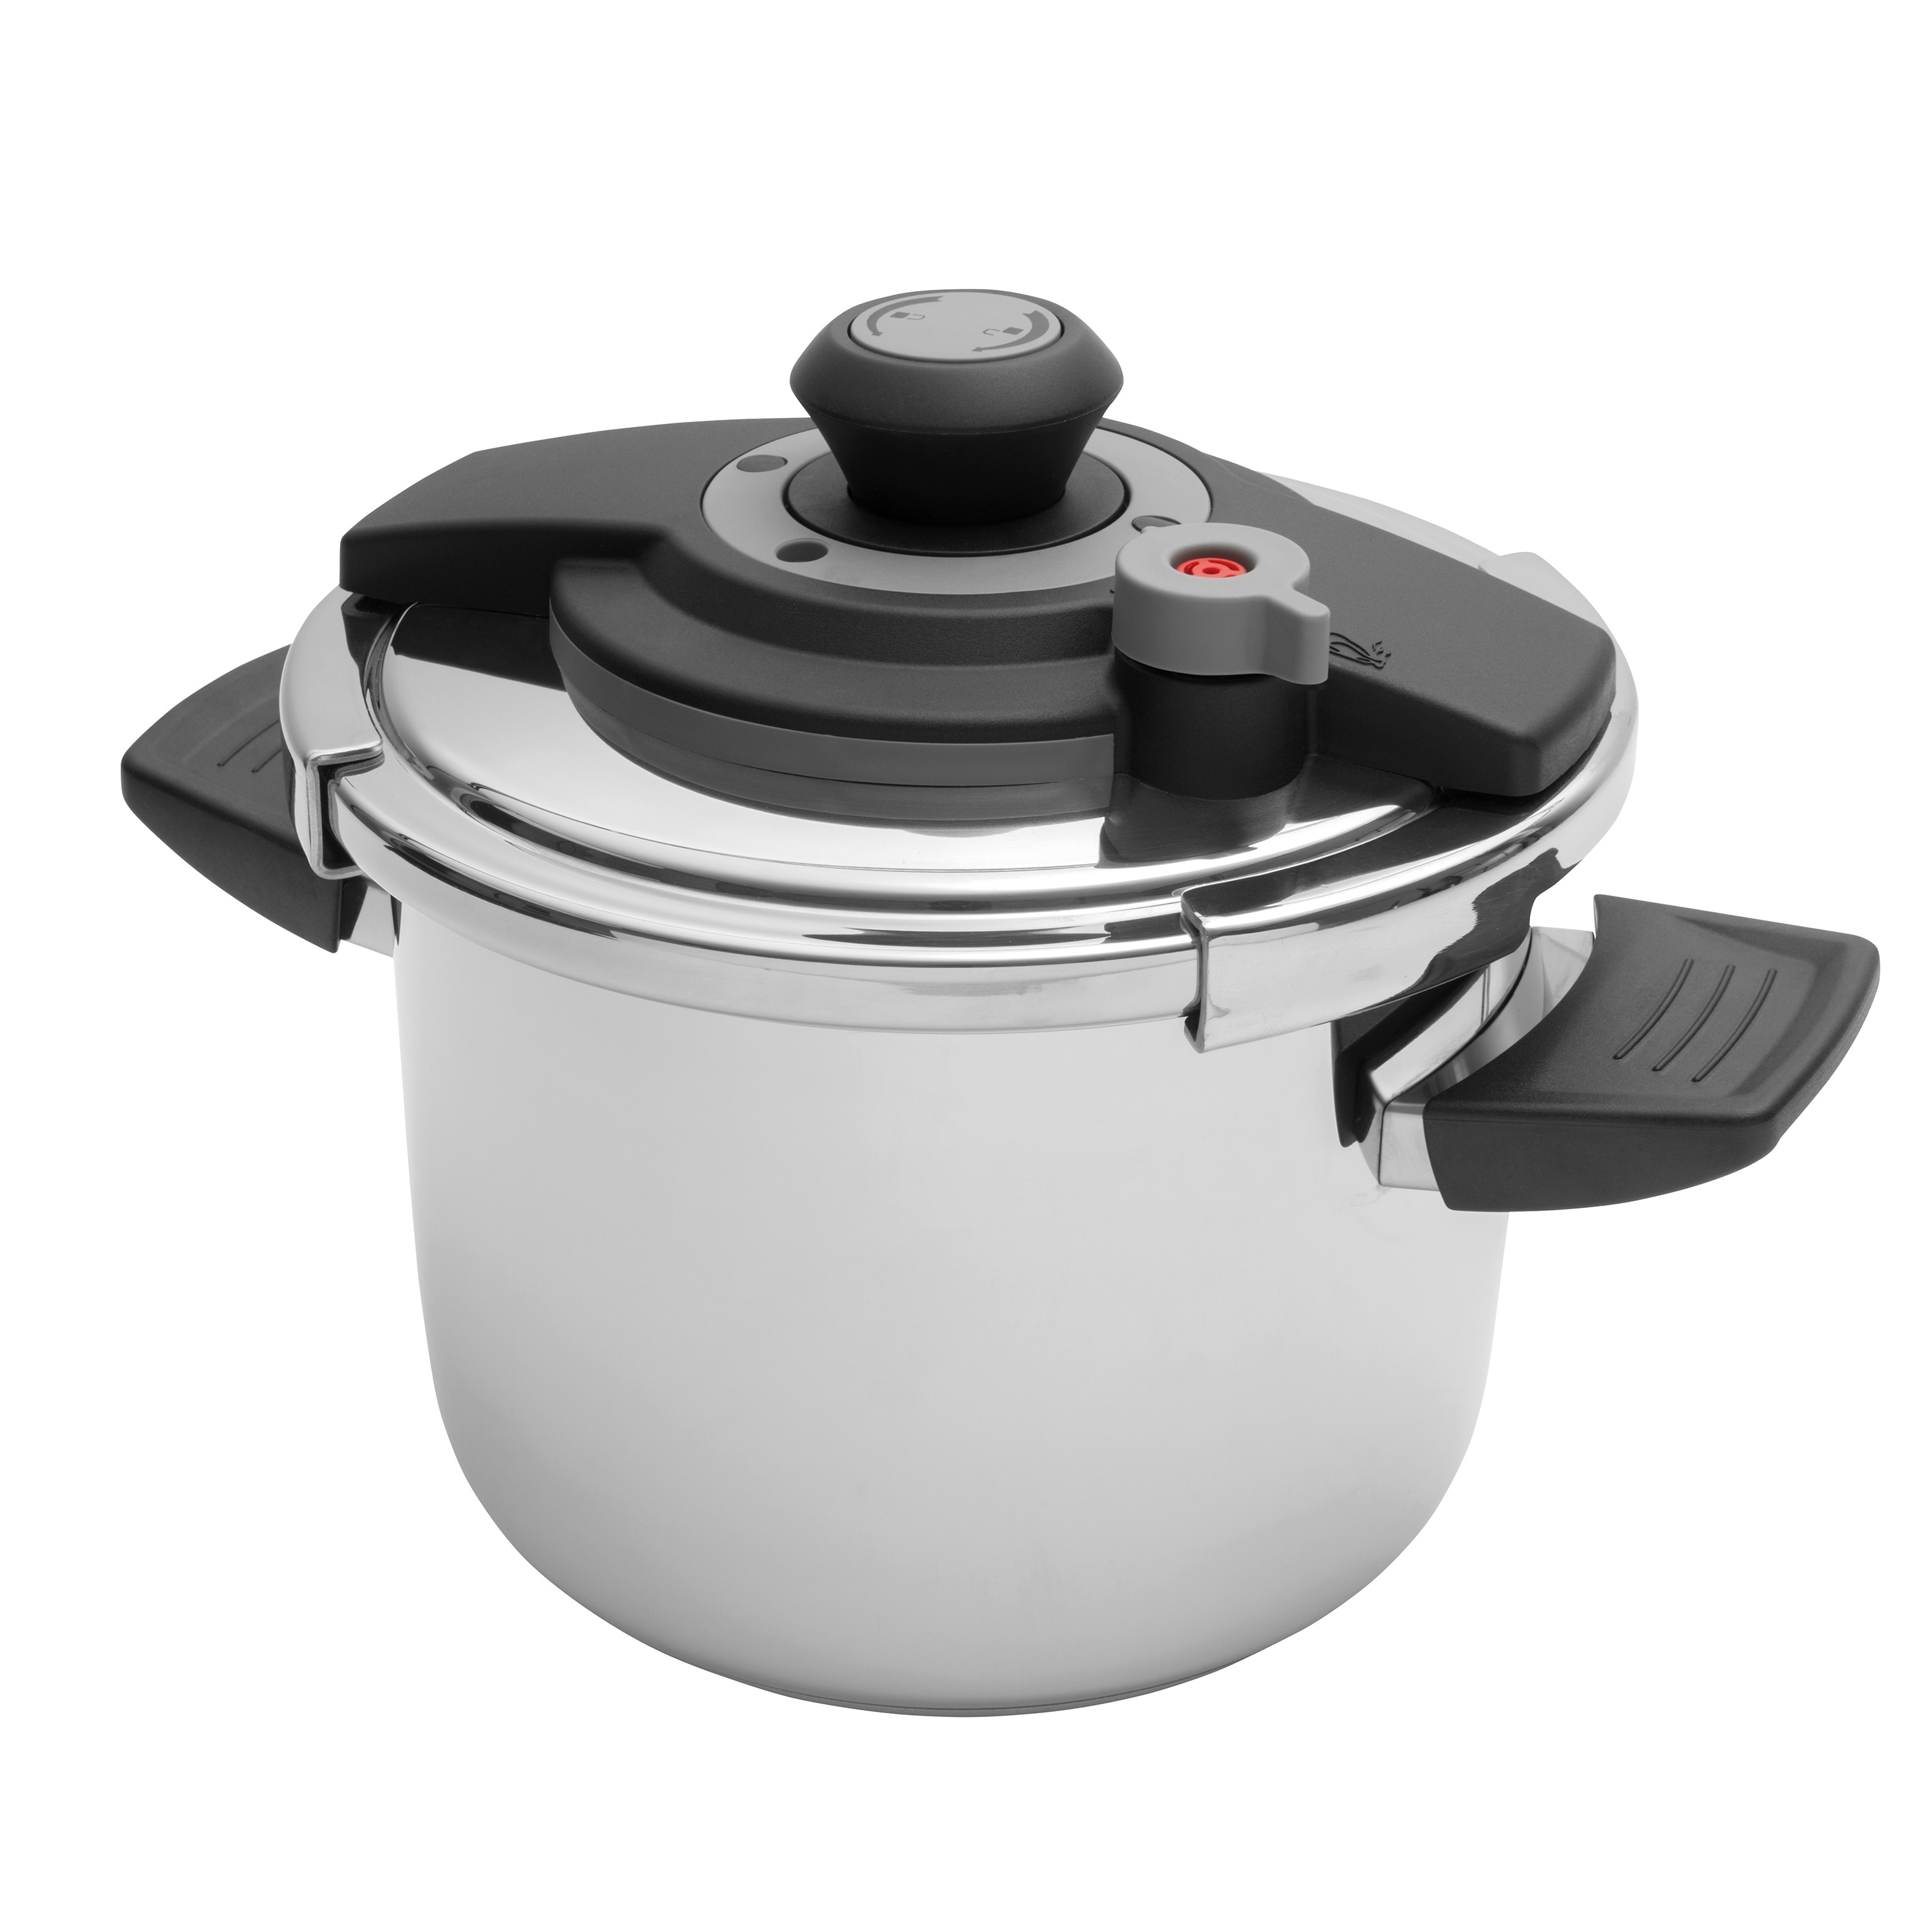 T-Fal Clipso 8qt Stainless Steel Pressure Cooker Black/Gray